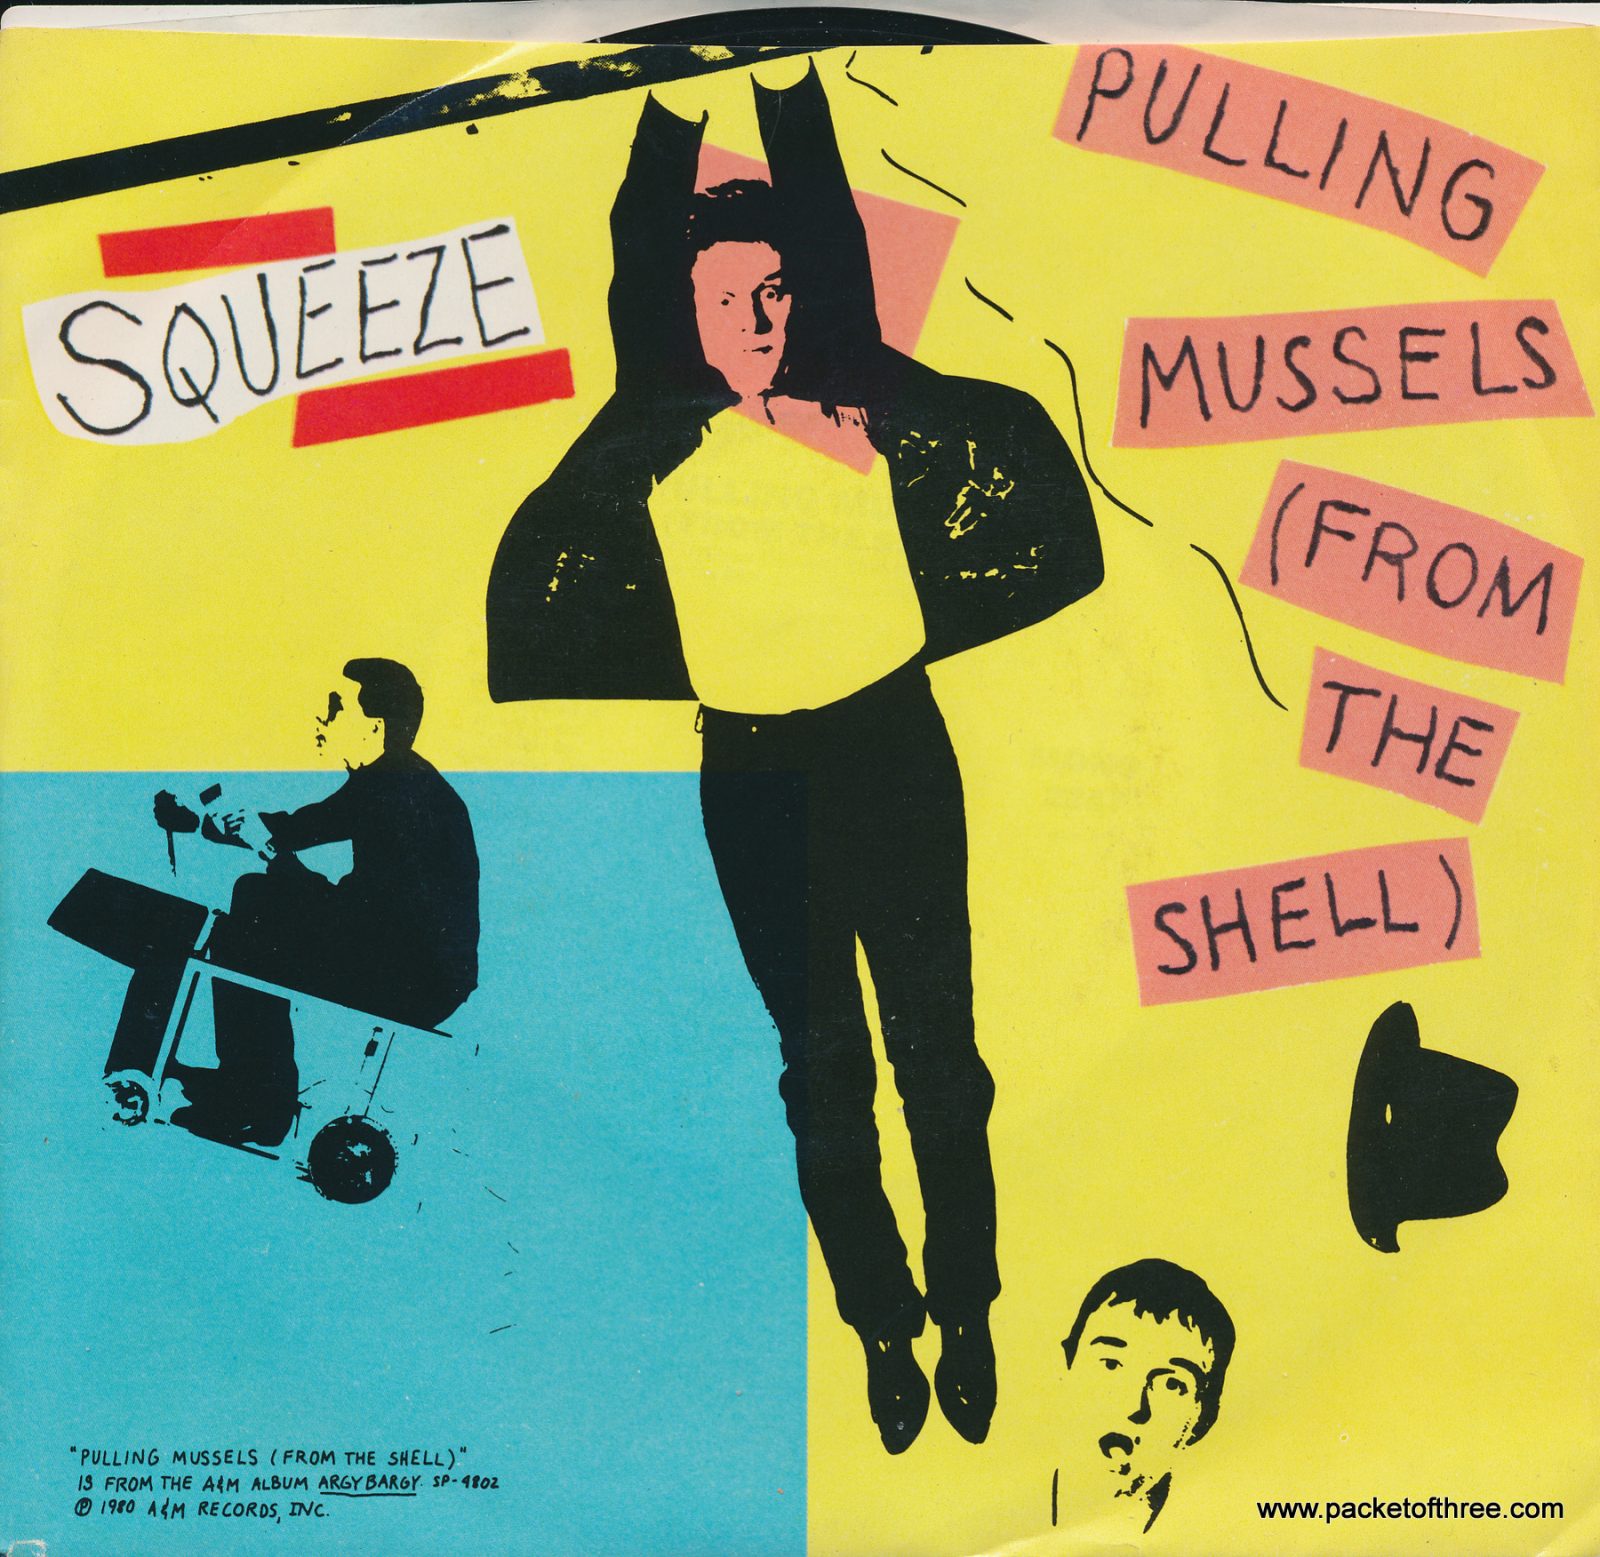 Pulling Mussels (From the Shell) - USA - 7" - picture sleeve - mono/stereo promotional copy